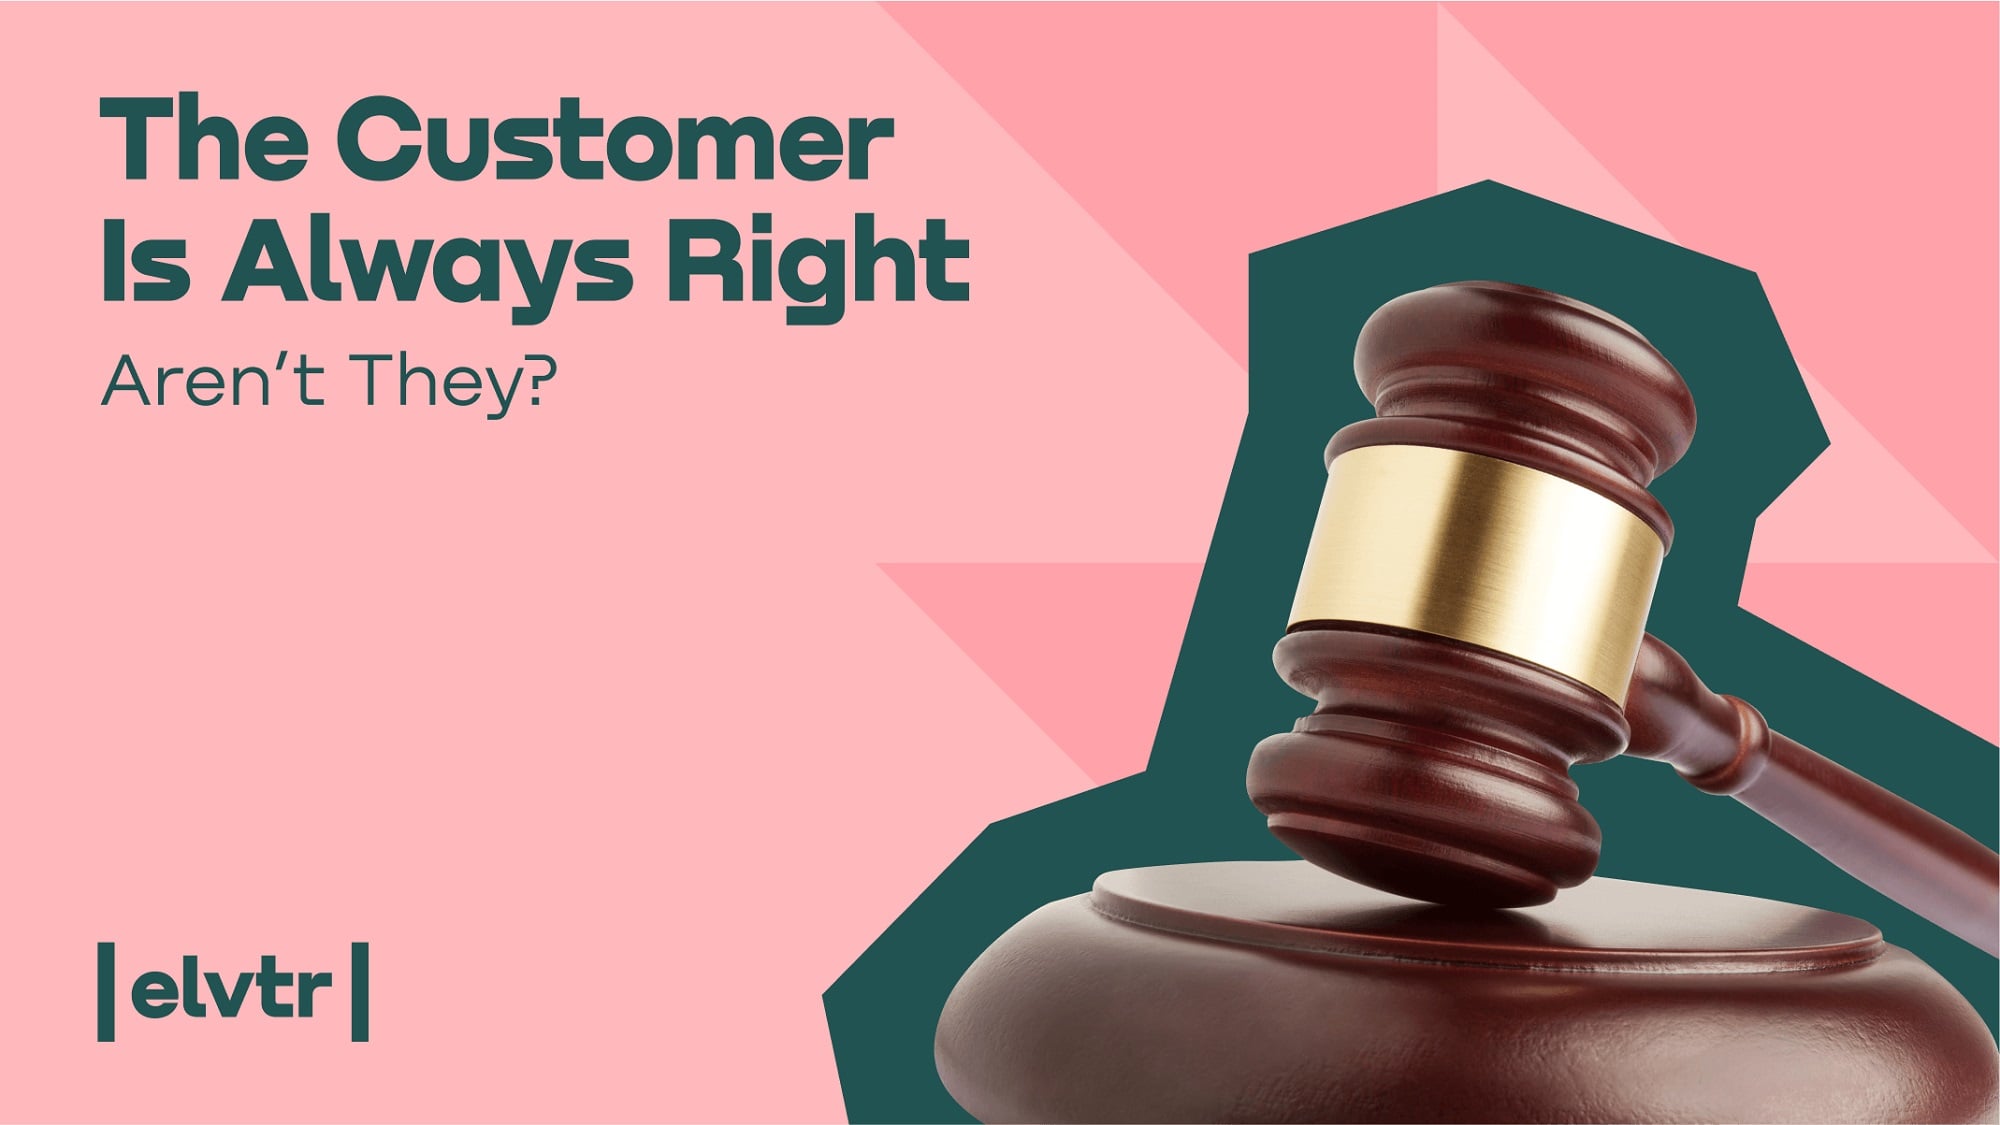 The Customer Is Always Right, Aren’t They? image